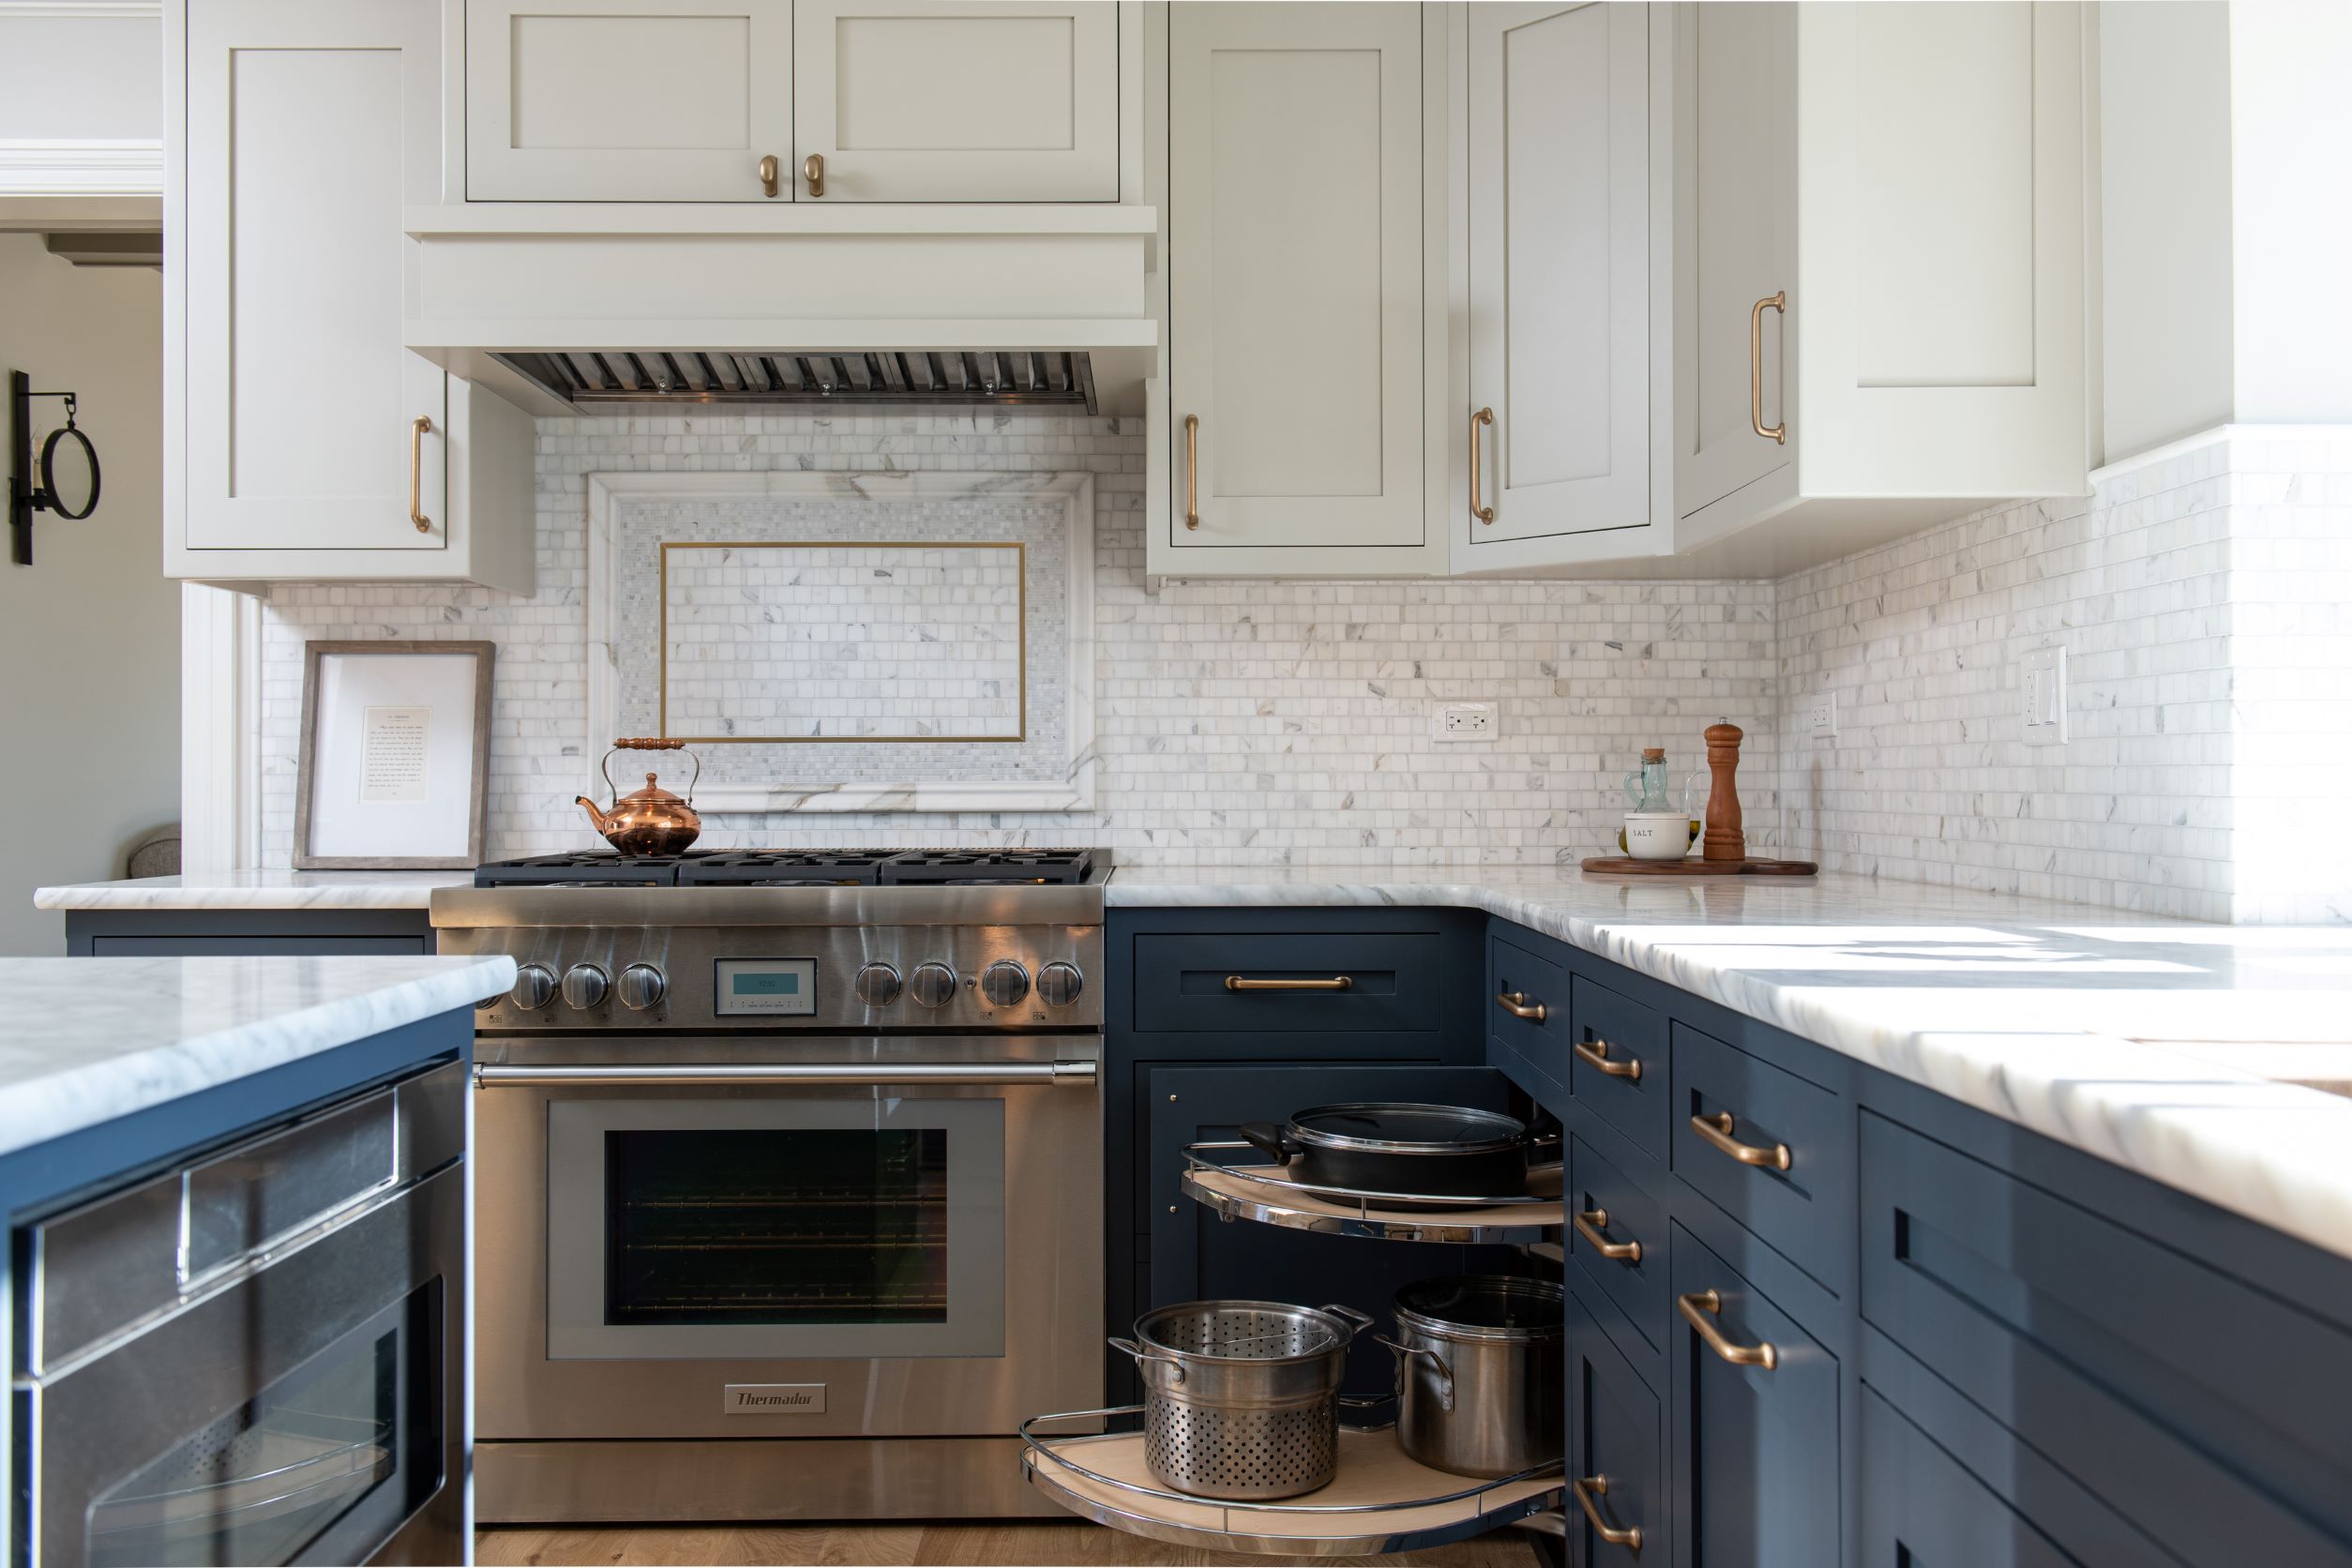 Kitchen Remodel Ideas - Trends to Know for your Chicago Home